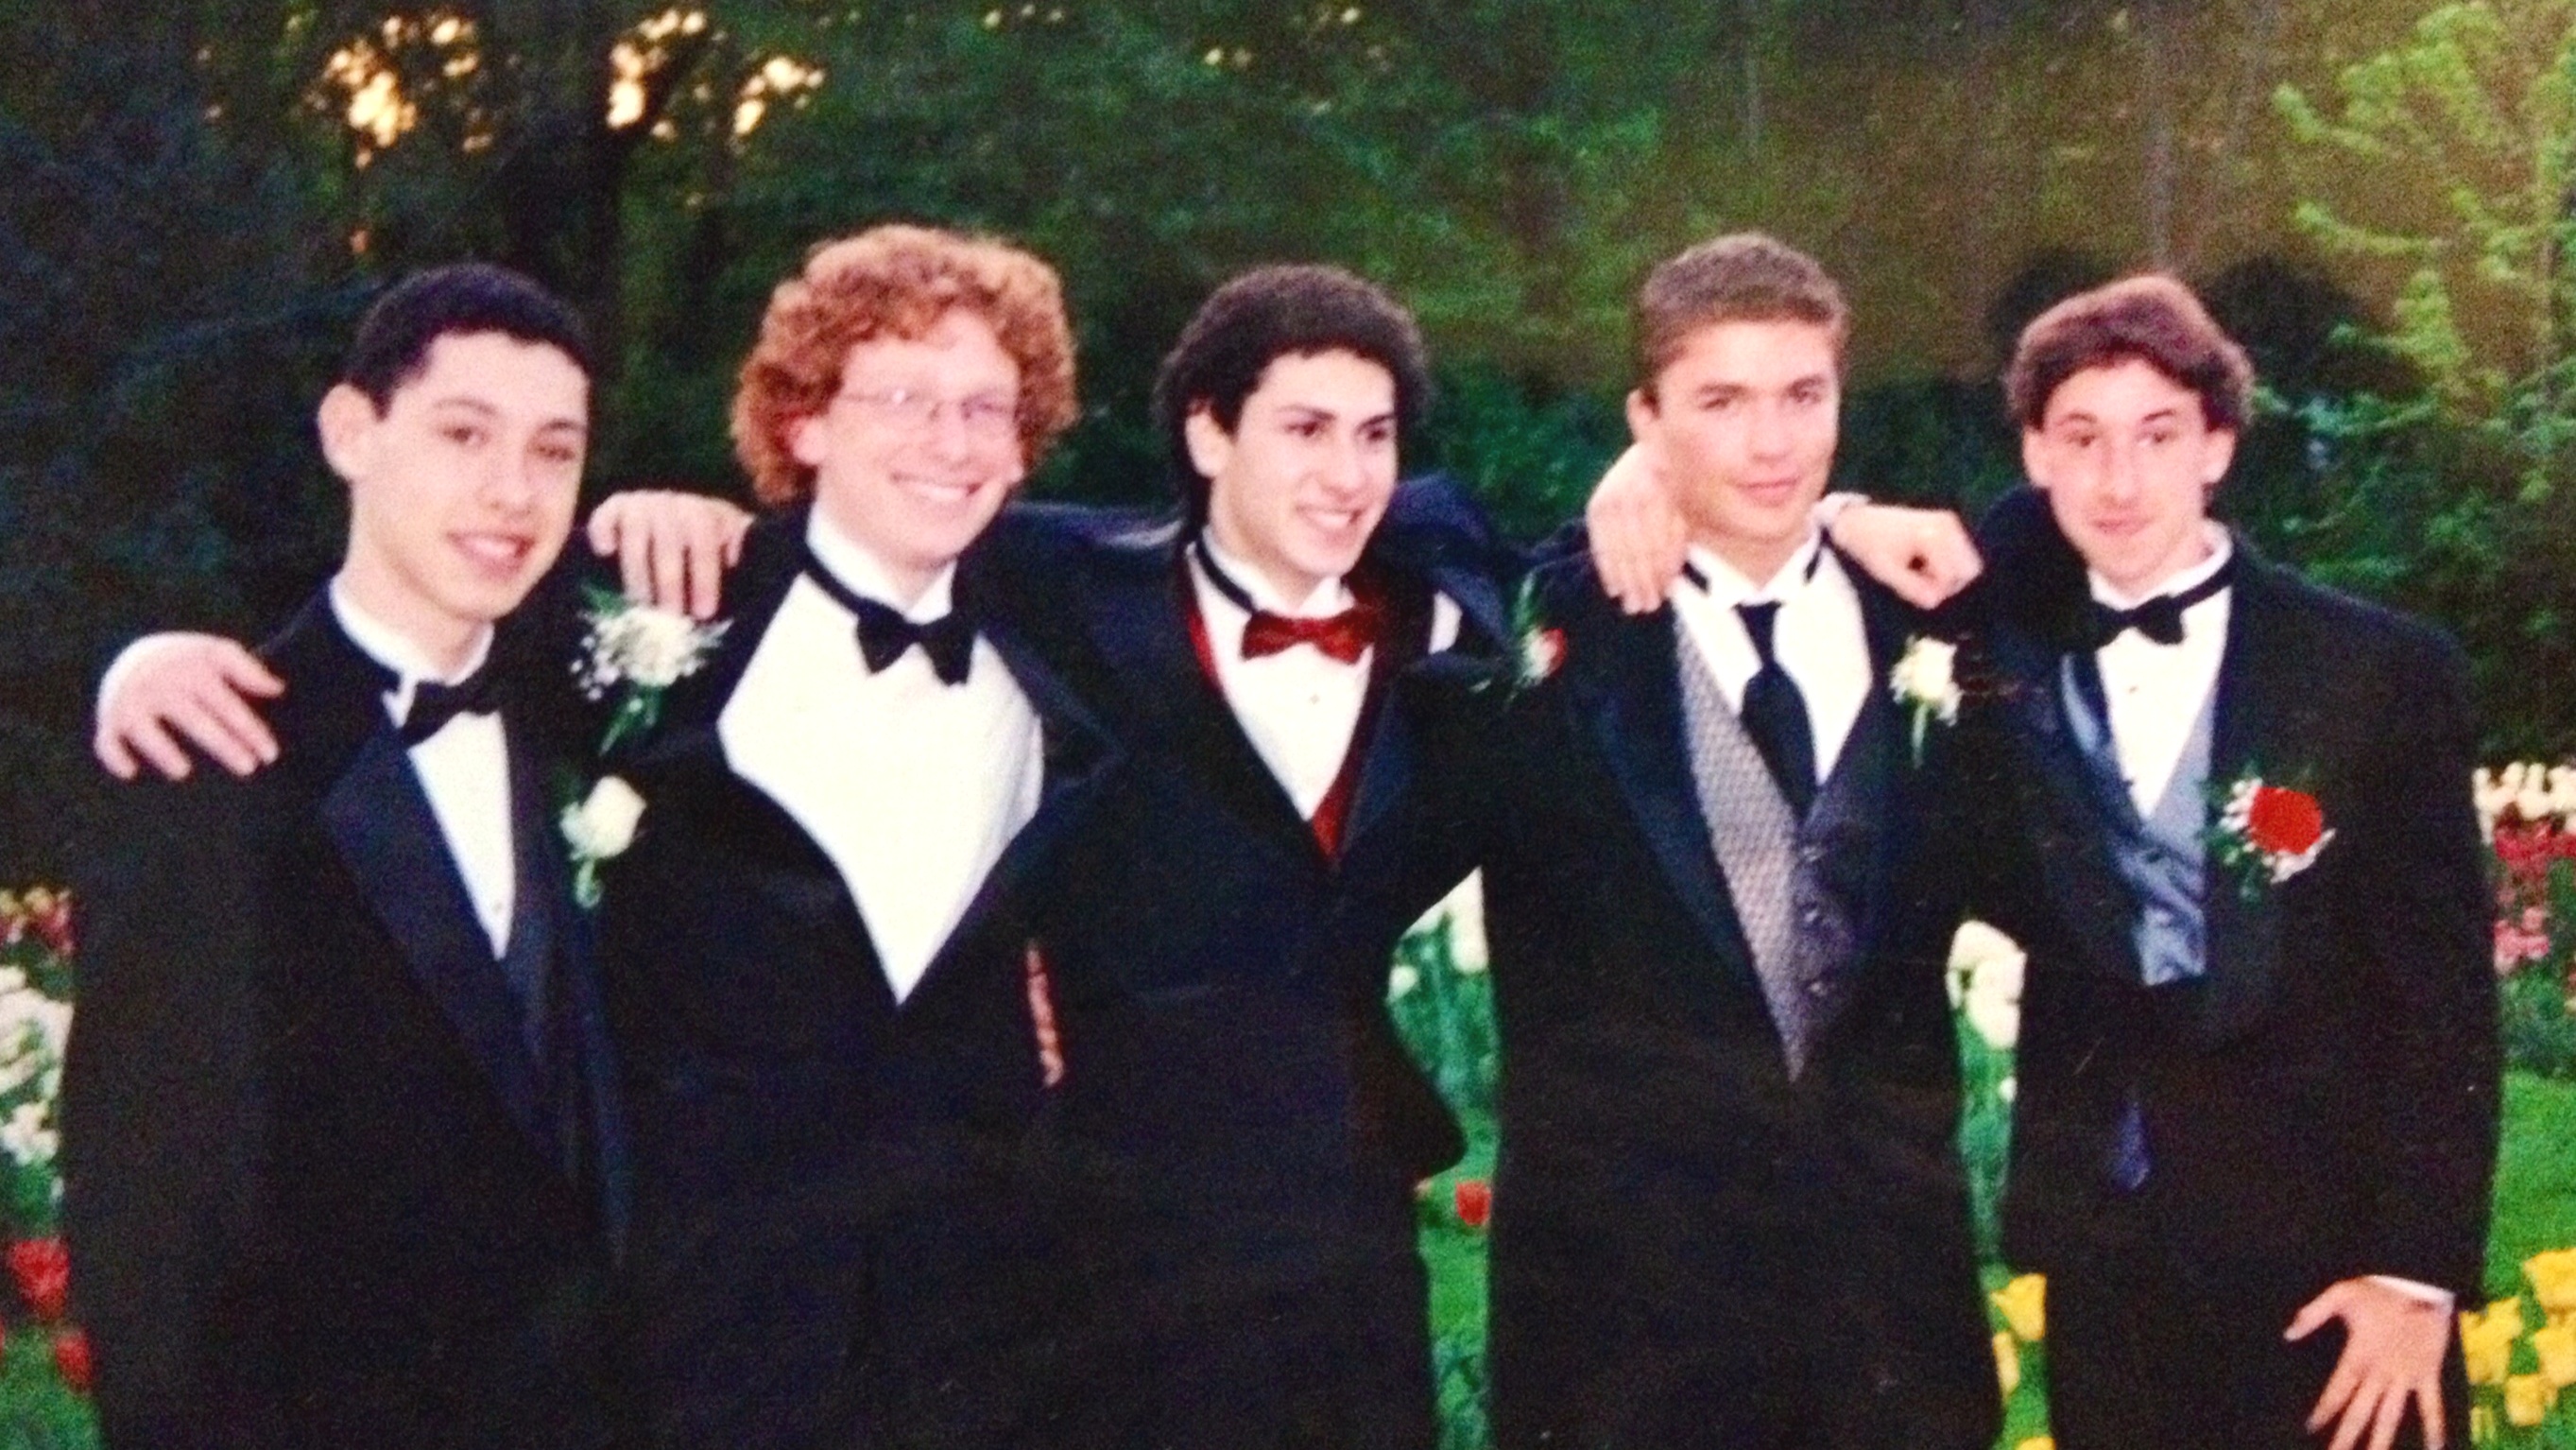 Aidan and friends at the prom.JPG